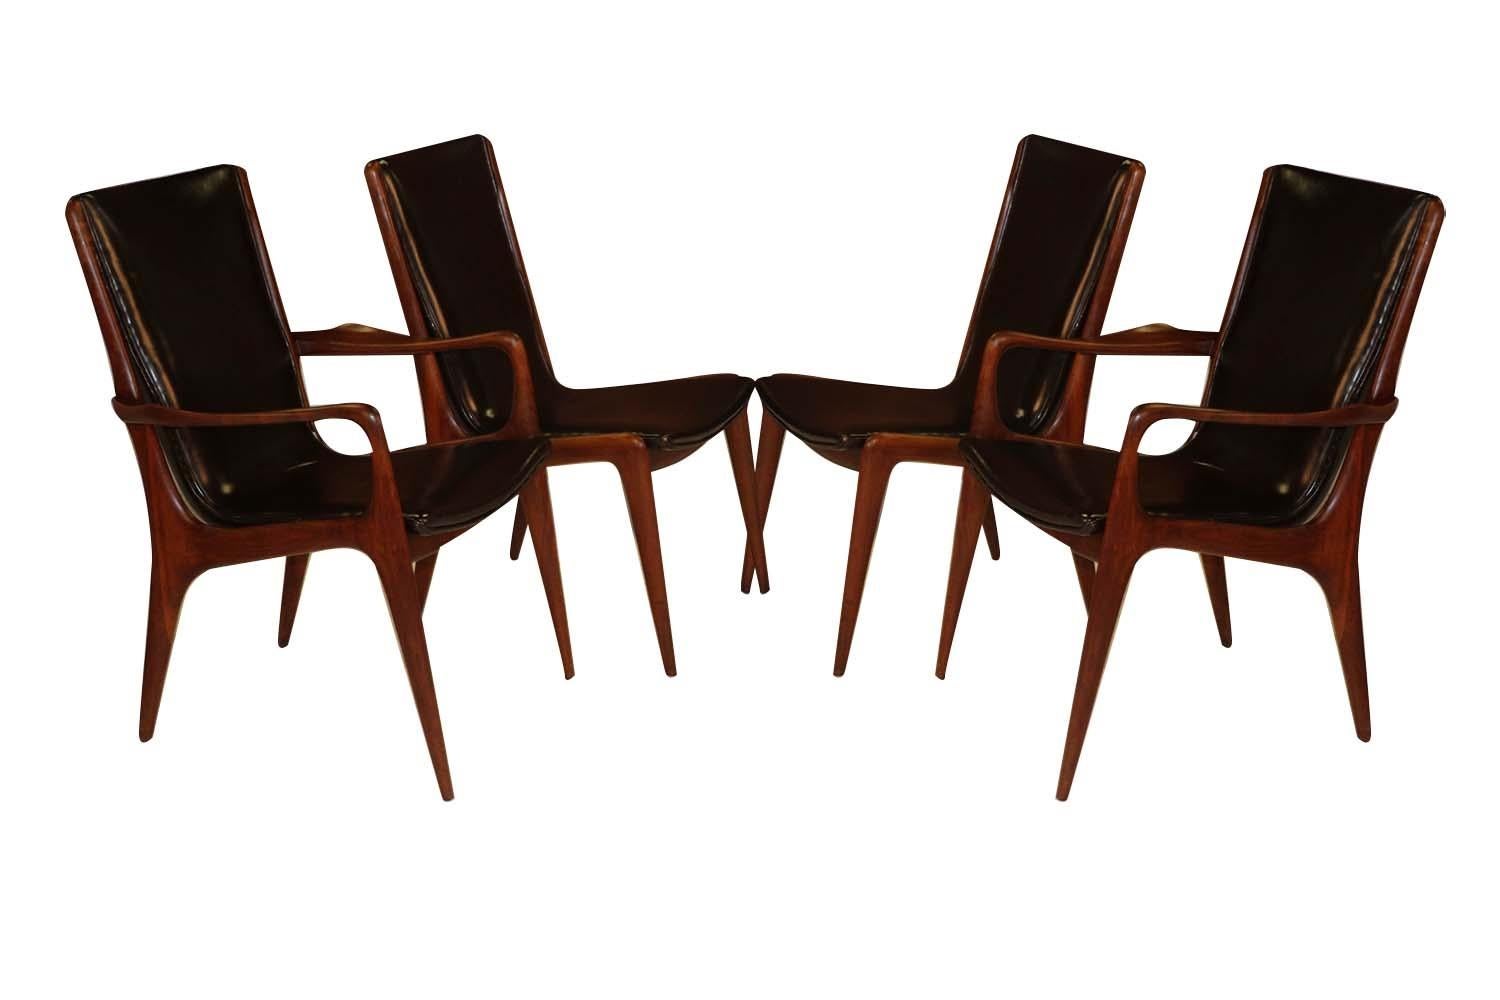 Midcentury Vladimir Kagan Sculpted Sling Dining Chairs Model VK 101 and VK 101A For Sale 2